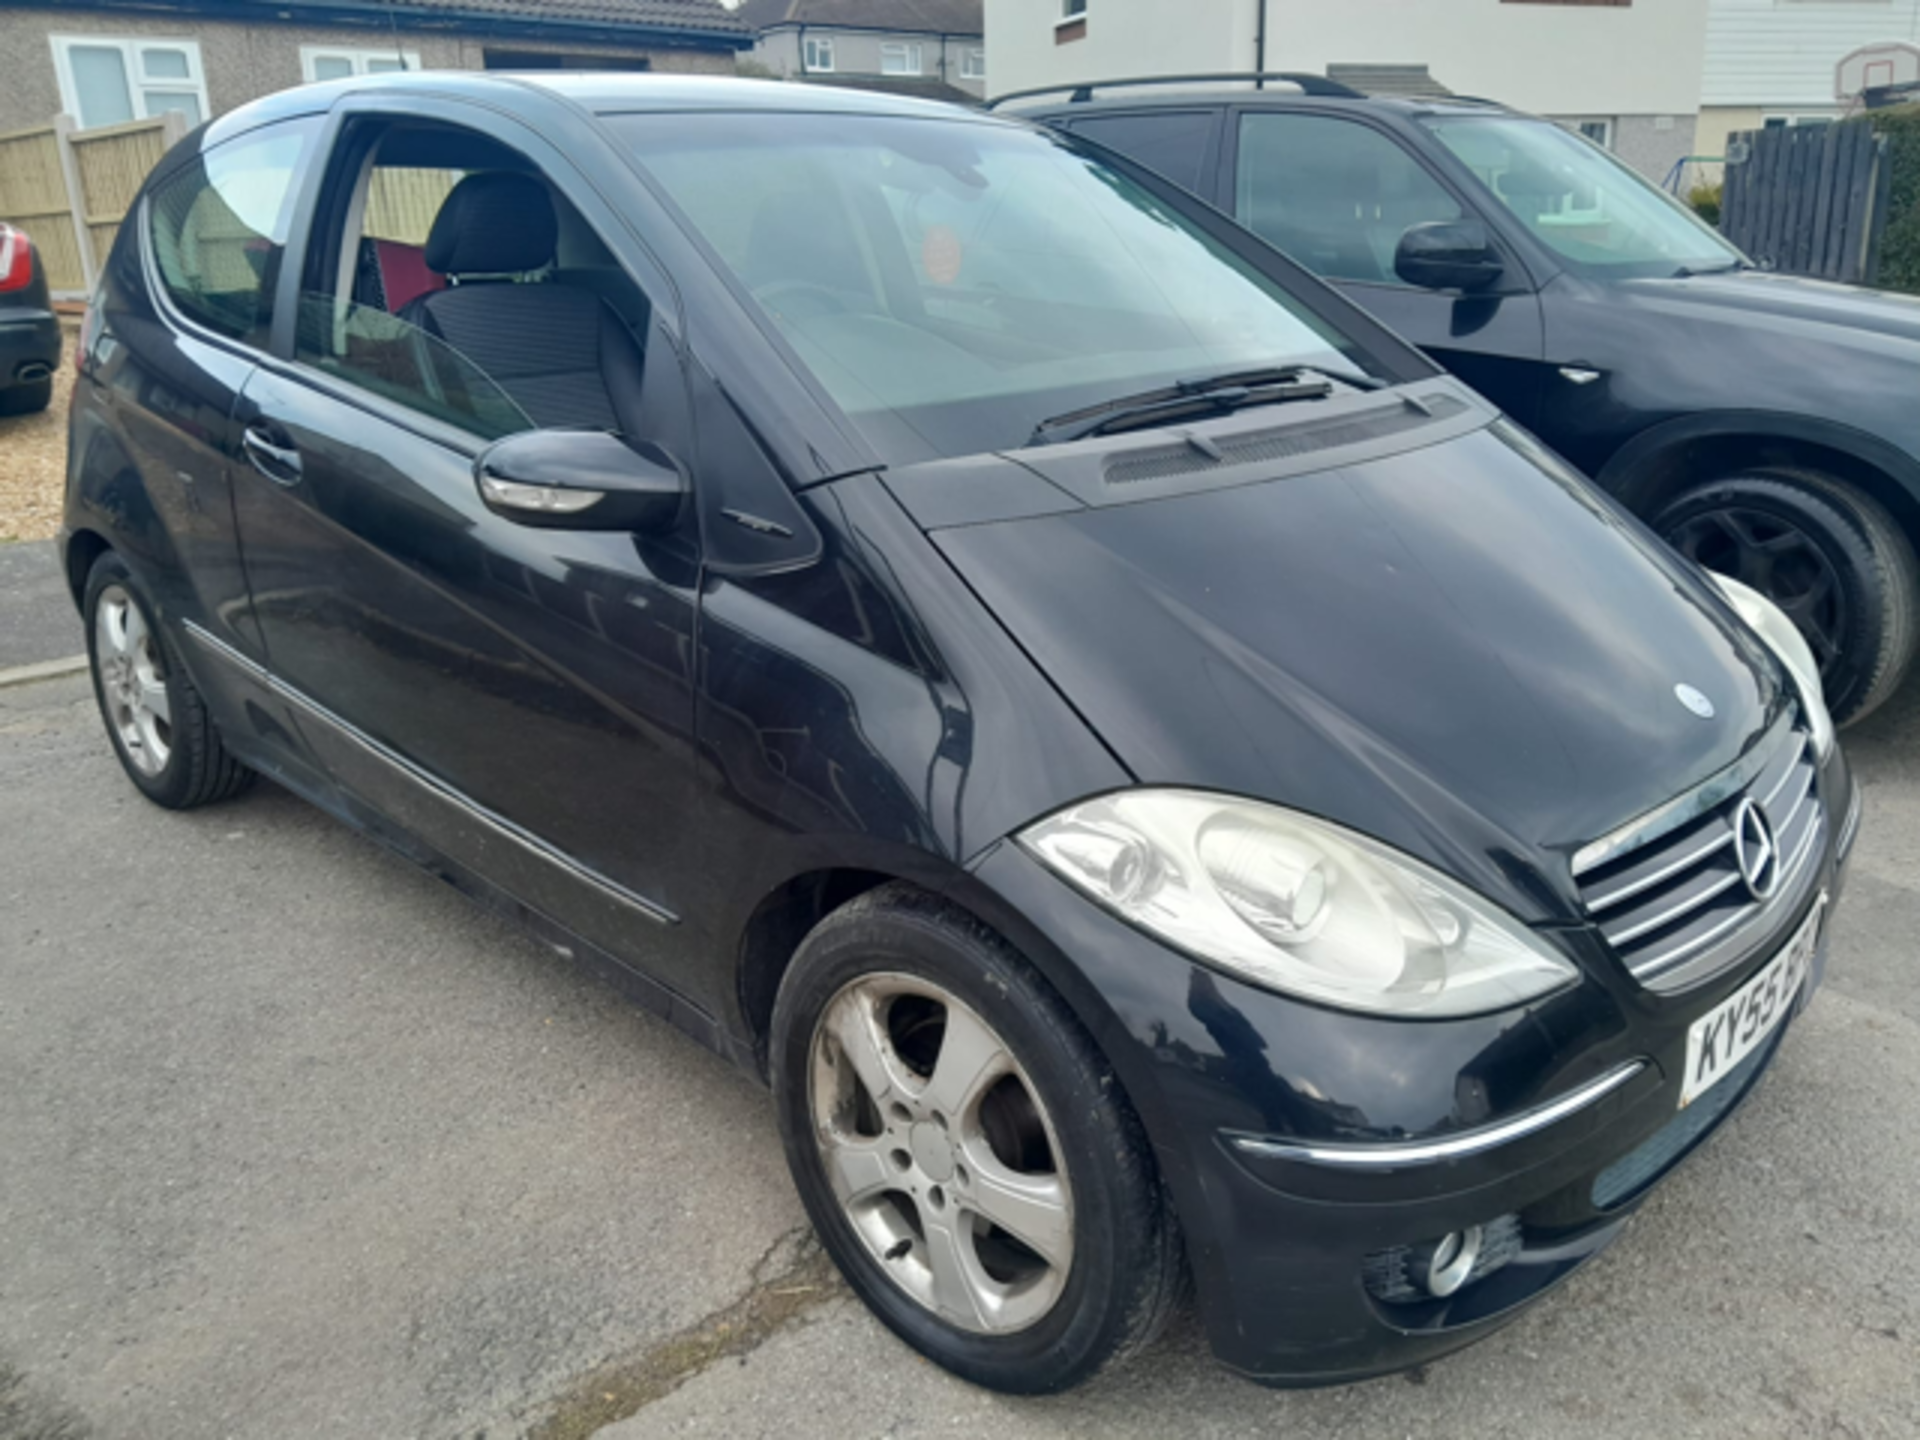 Mercedes A180 CDI, KY55 BPZ - Image 2 of 8